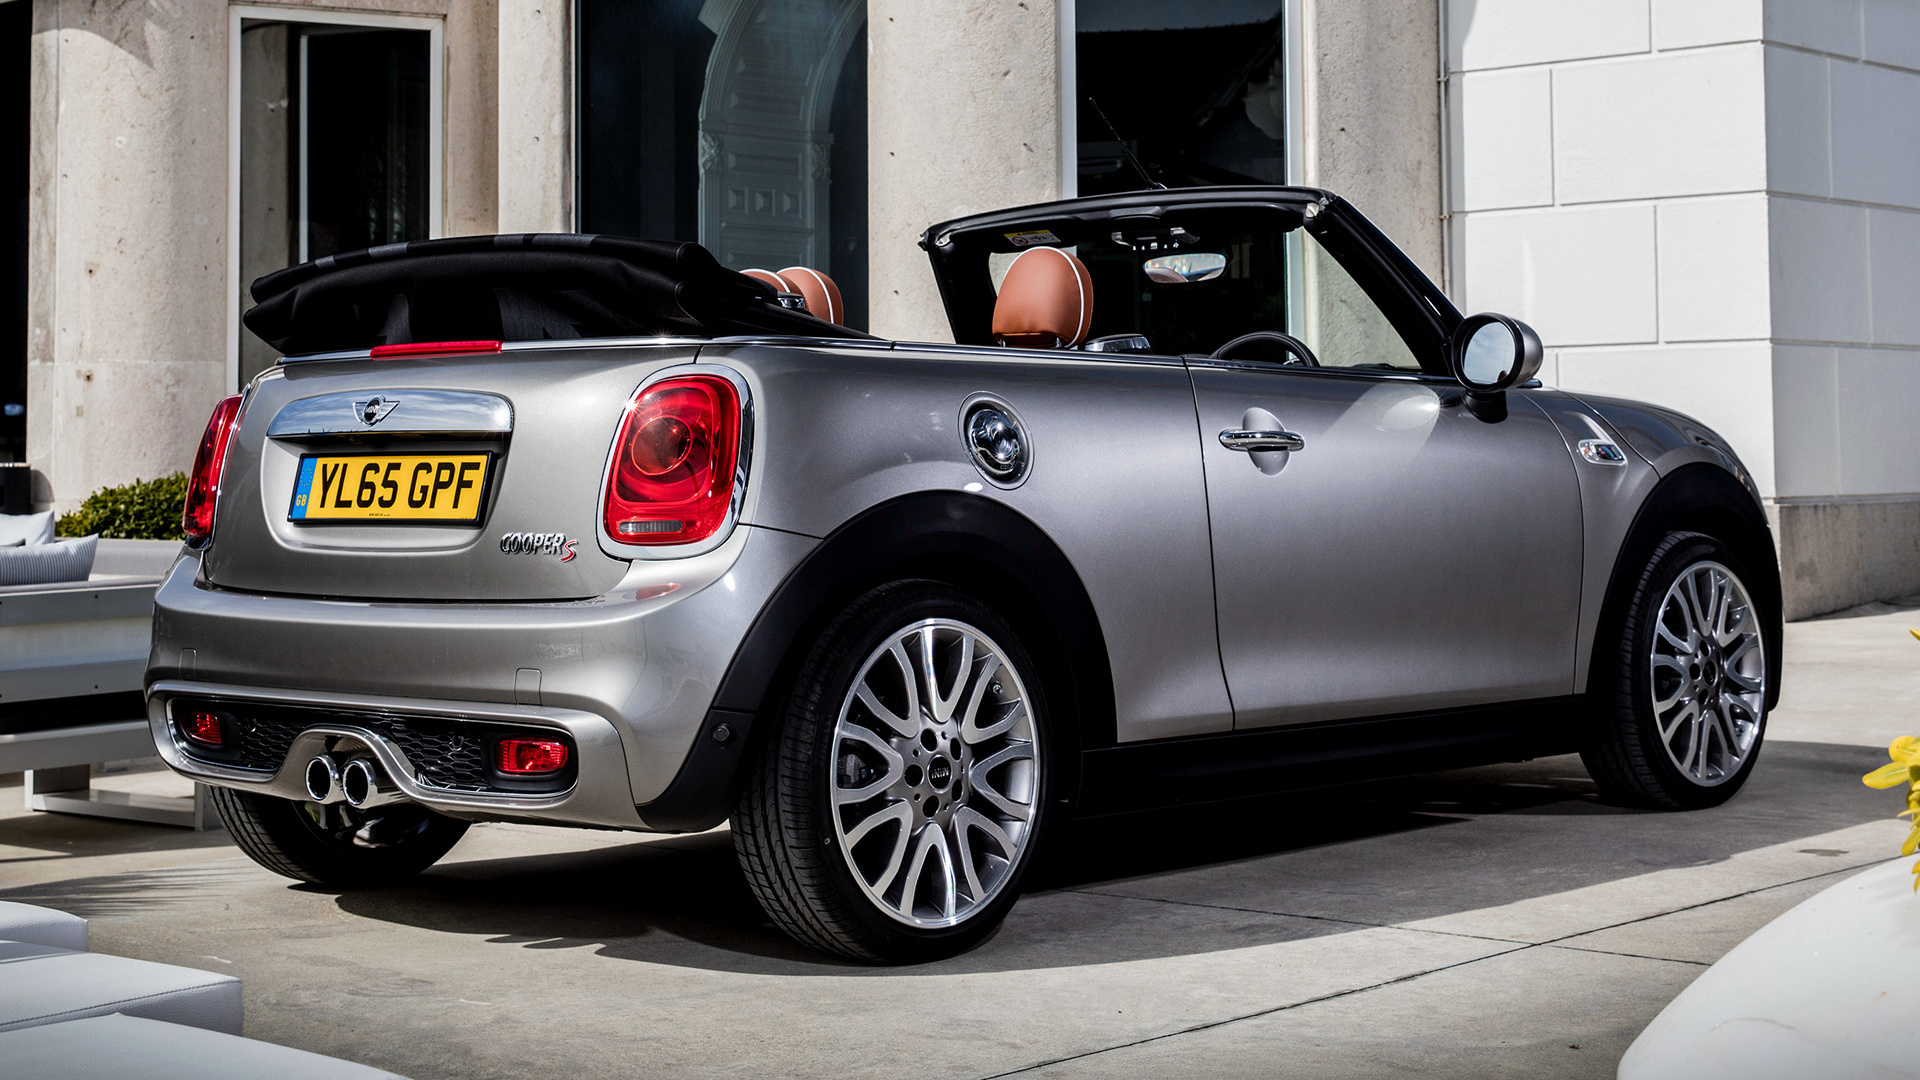 2016 Mini Cooper S Convertible Open 150 Edition (UK) Wallpapers and